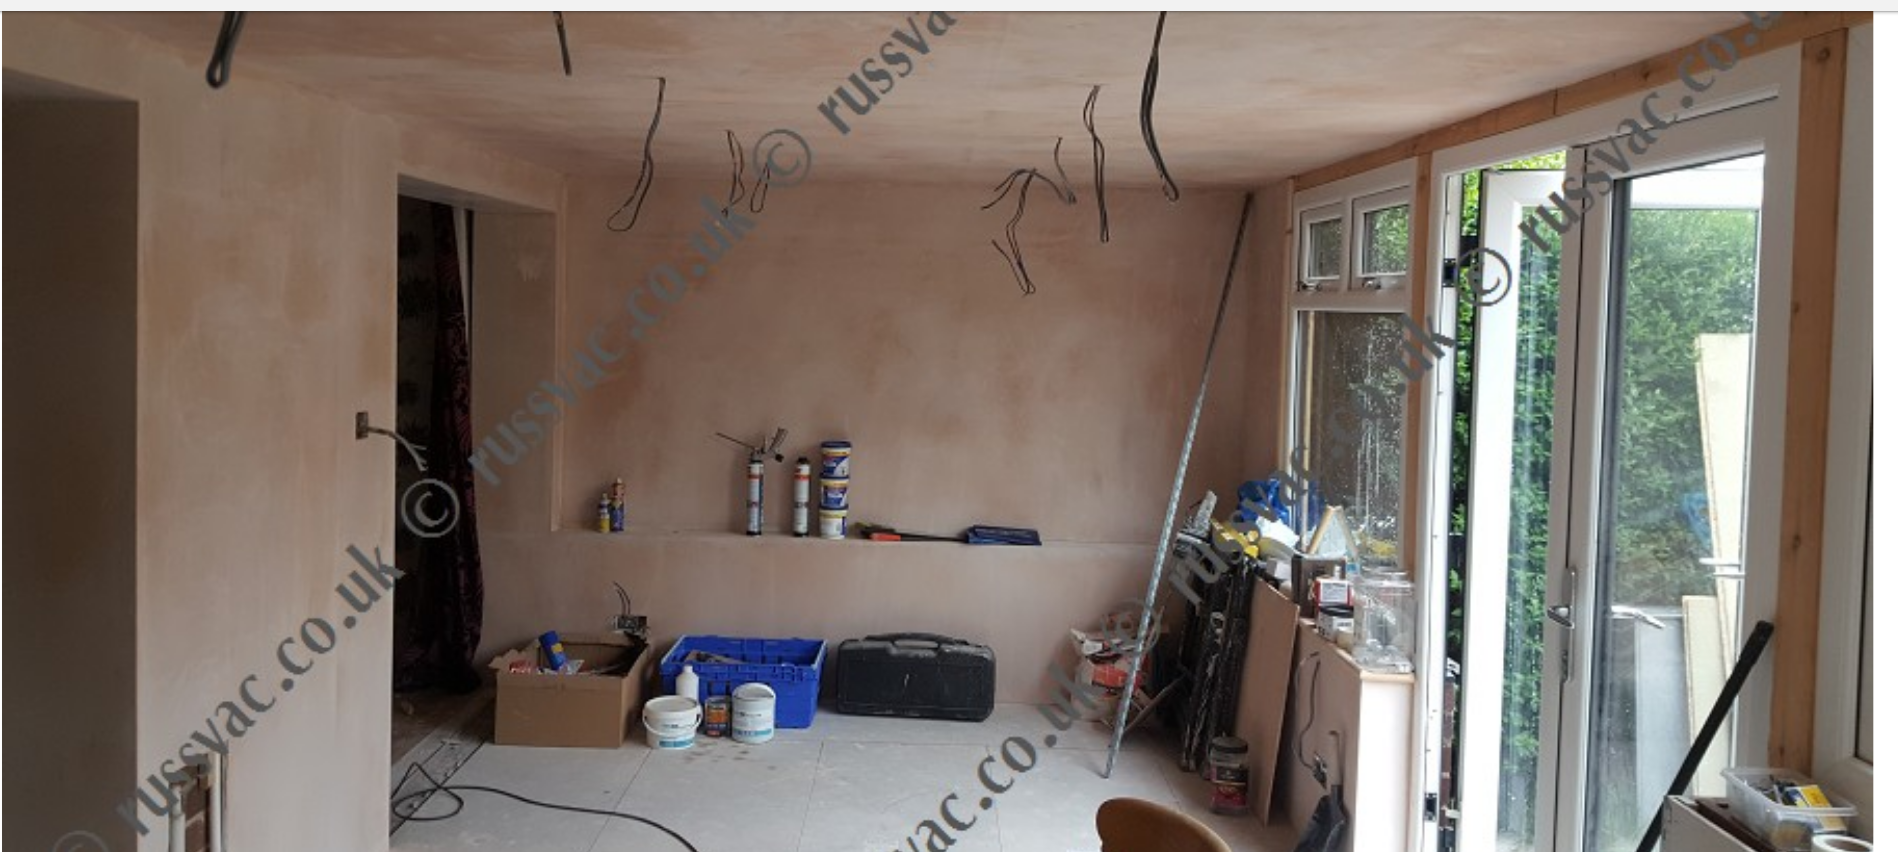 Wall and ceiling plastering